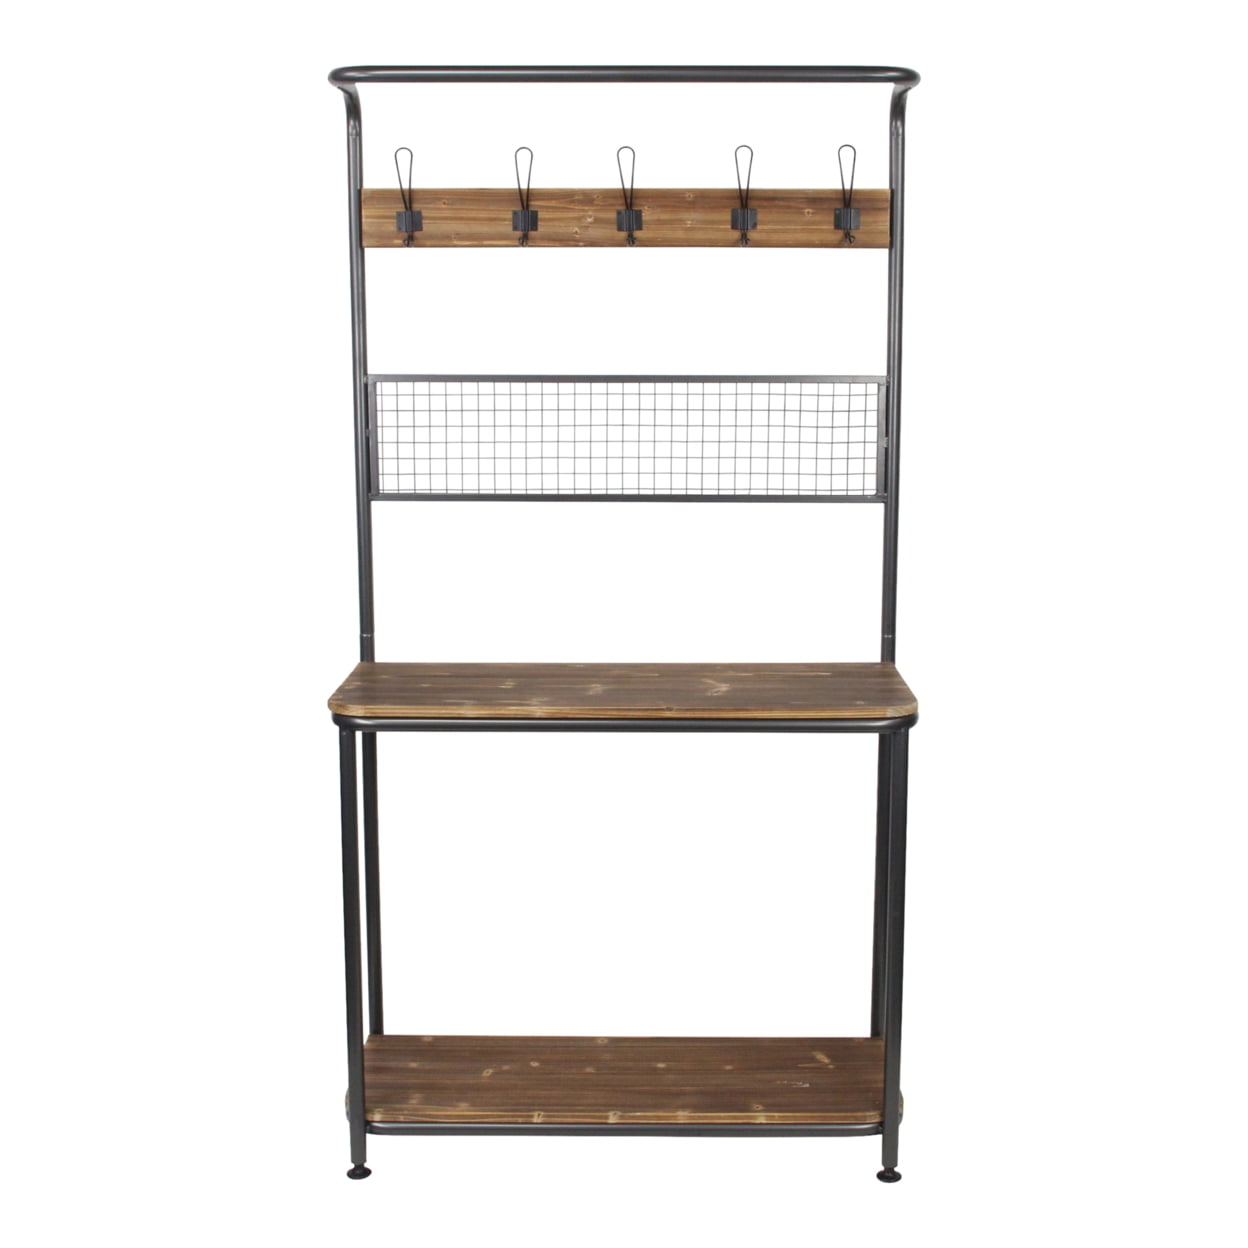 Picture of CheungsRattan FP-4254 Garden Storage Table with Hooks